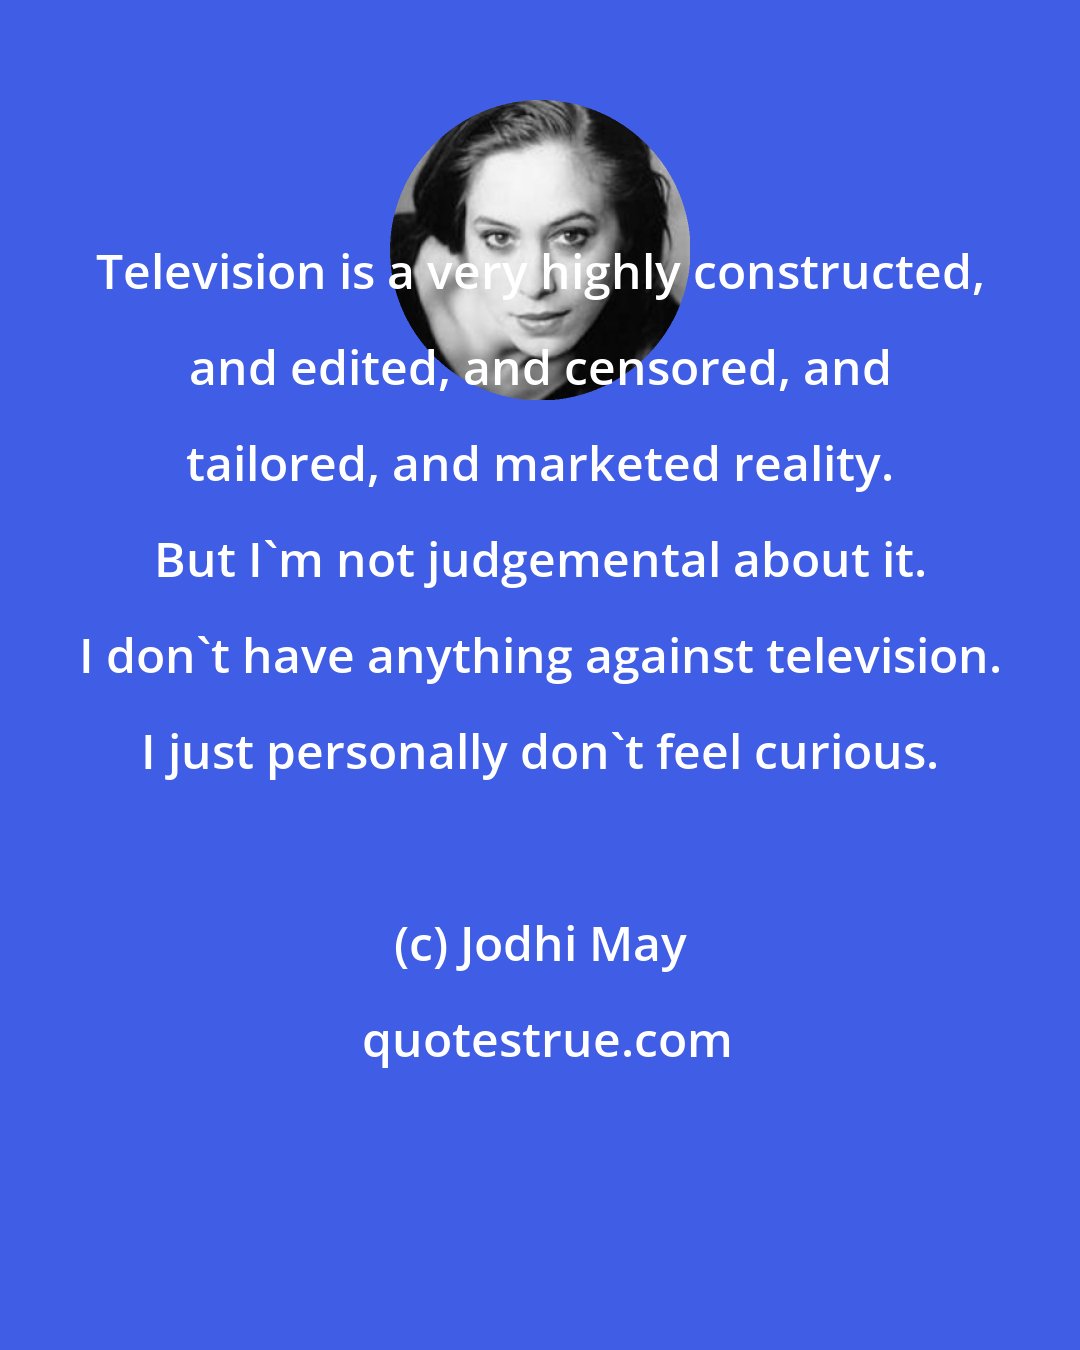 Jodhi May: Television is a very highly constructed, and edited, and censored, and tailored, and marketed reality. But I'm not judgemental about it. I don't have anything against television. I just personally don't feel curious.